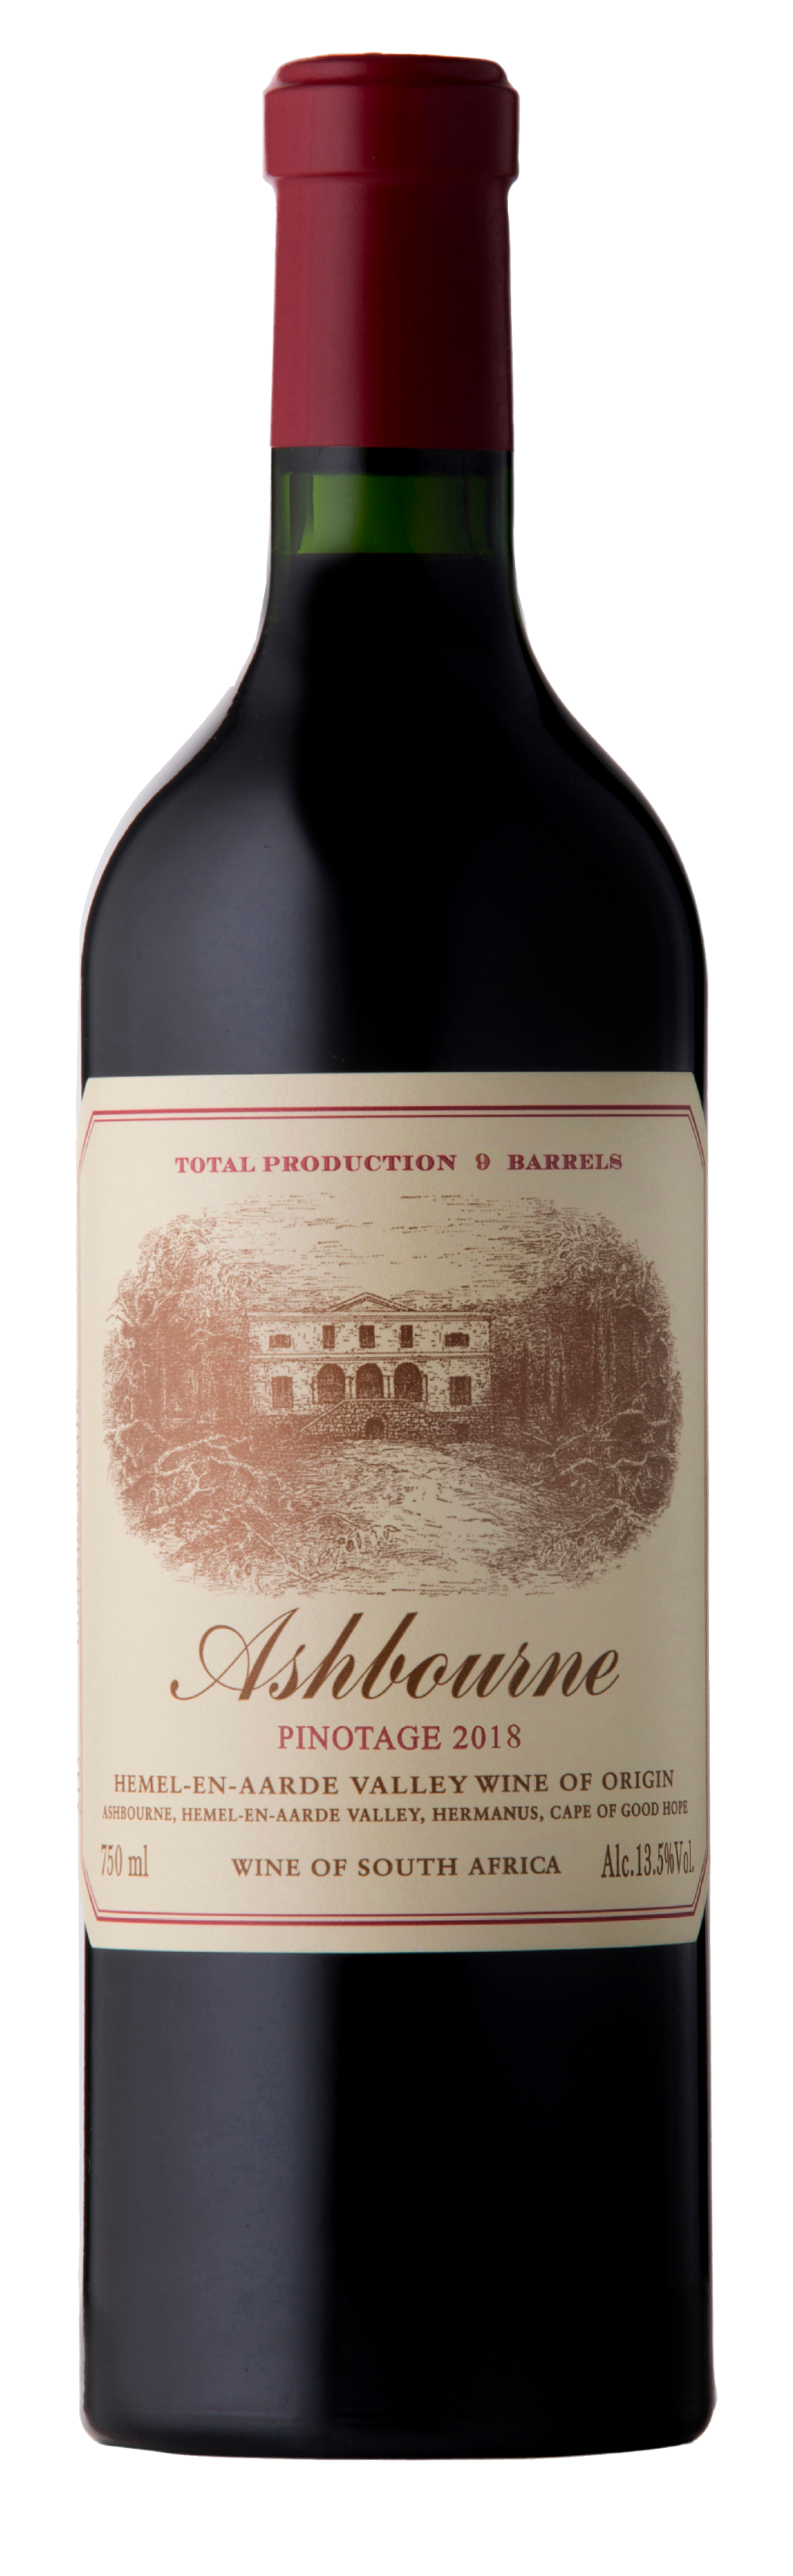 Ashbourne<br />2018 Pinotage<br>South Africa